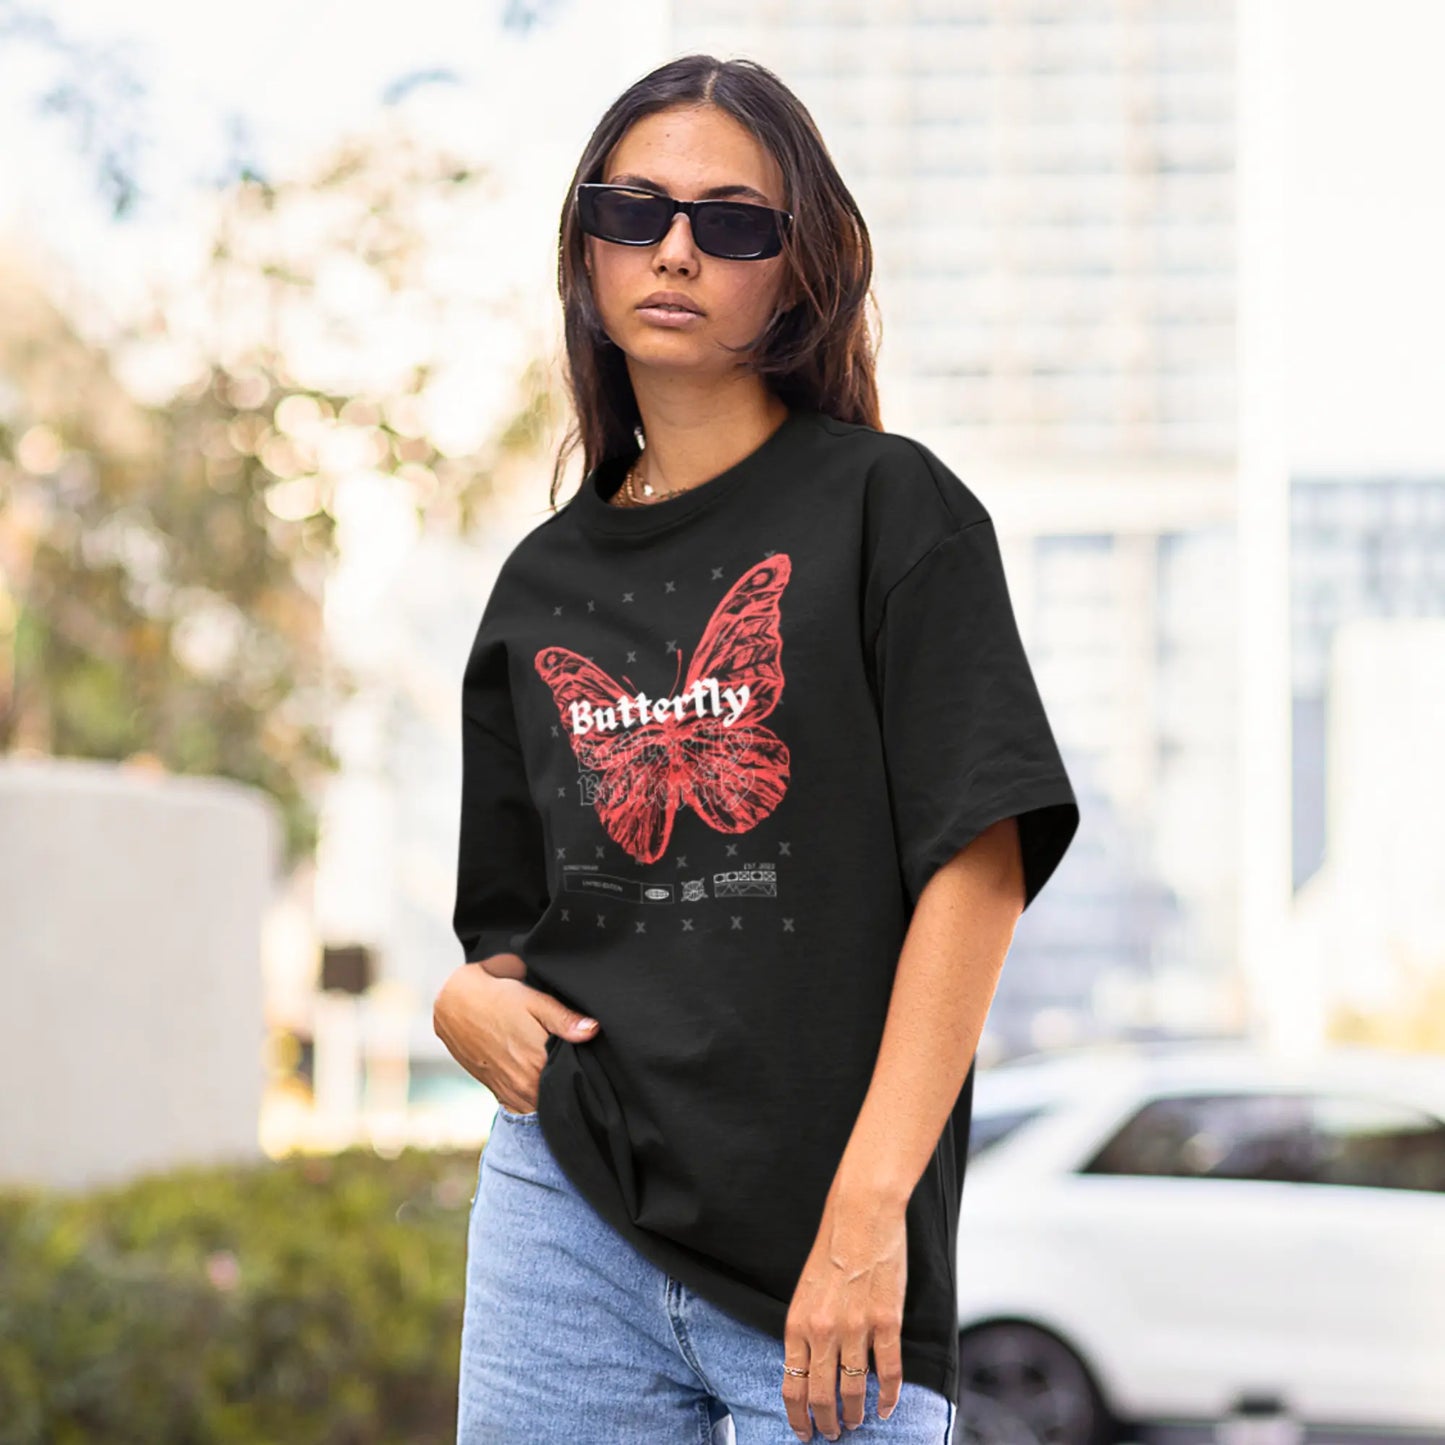 Red Butterfly Graphic Tee - Street Style Print T-Shirt